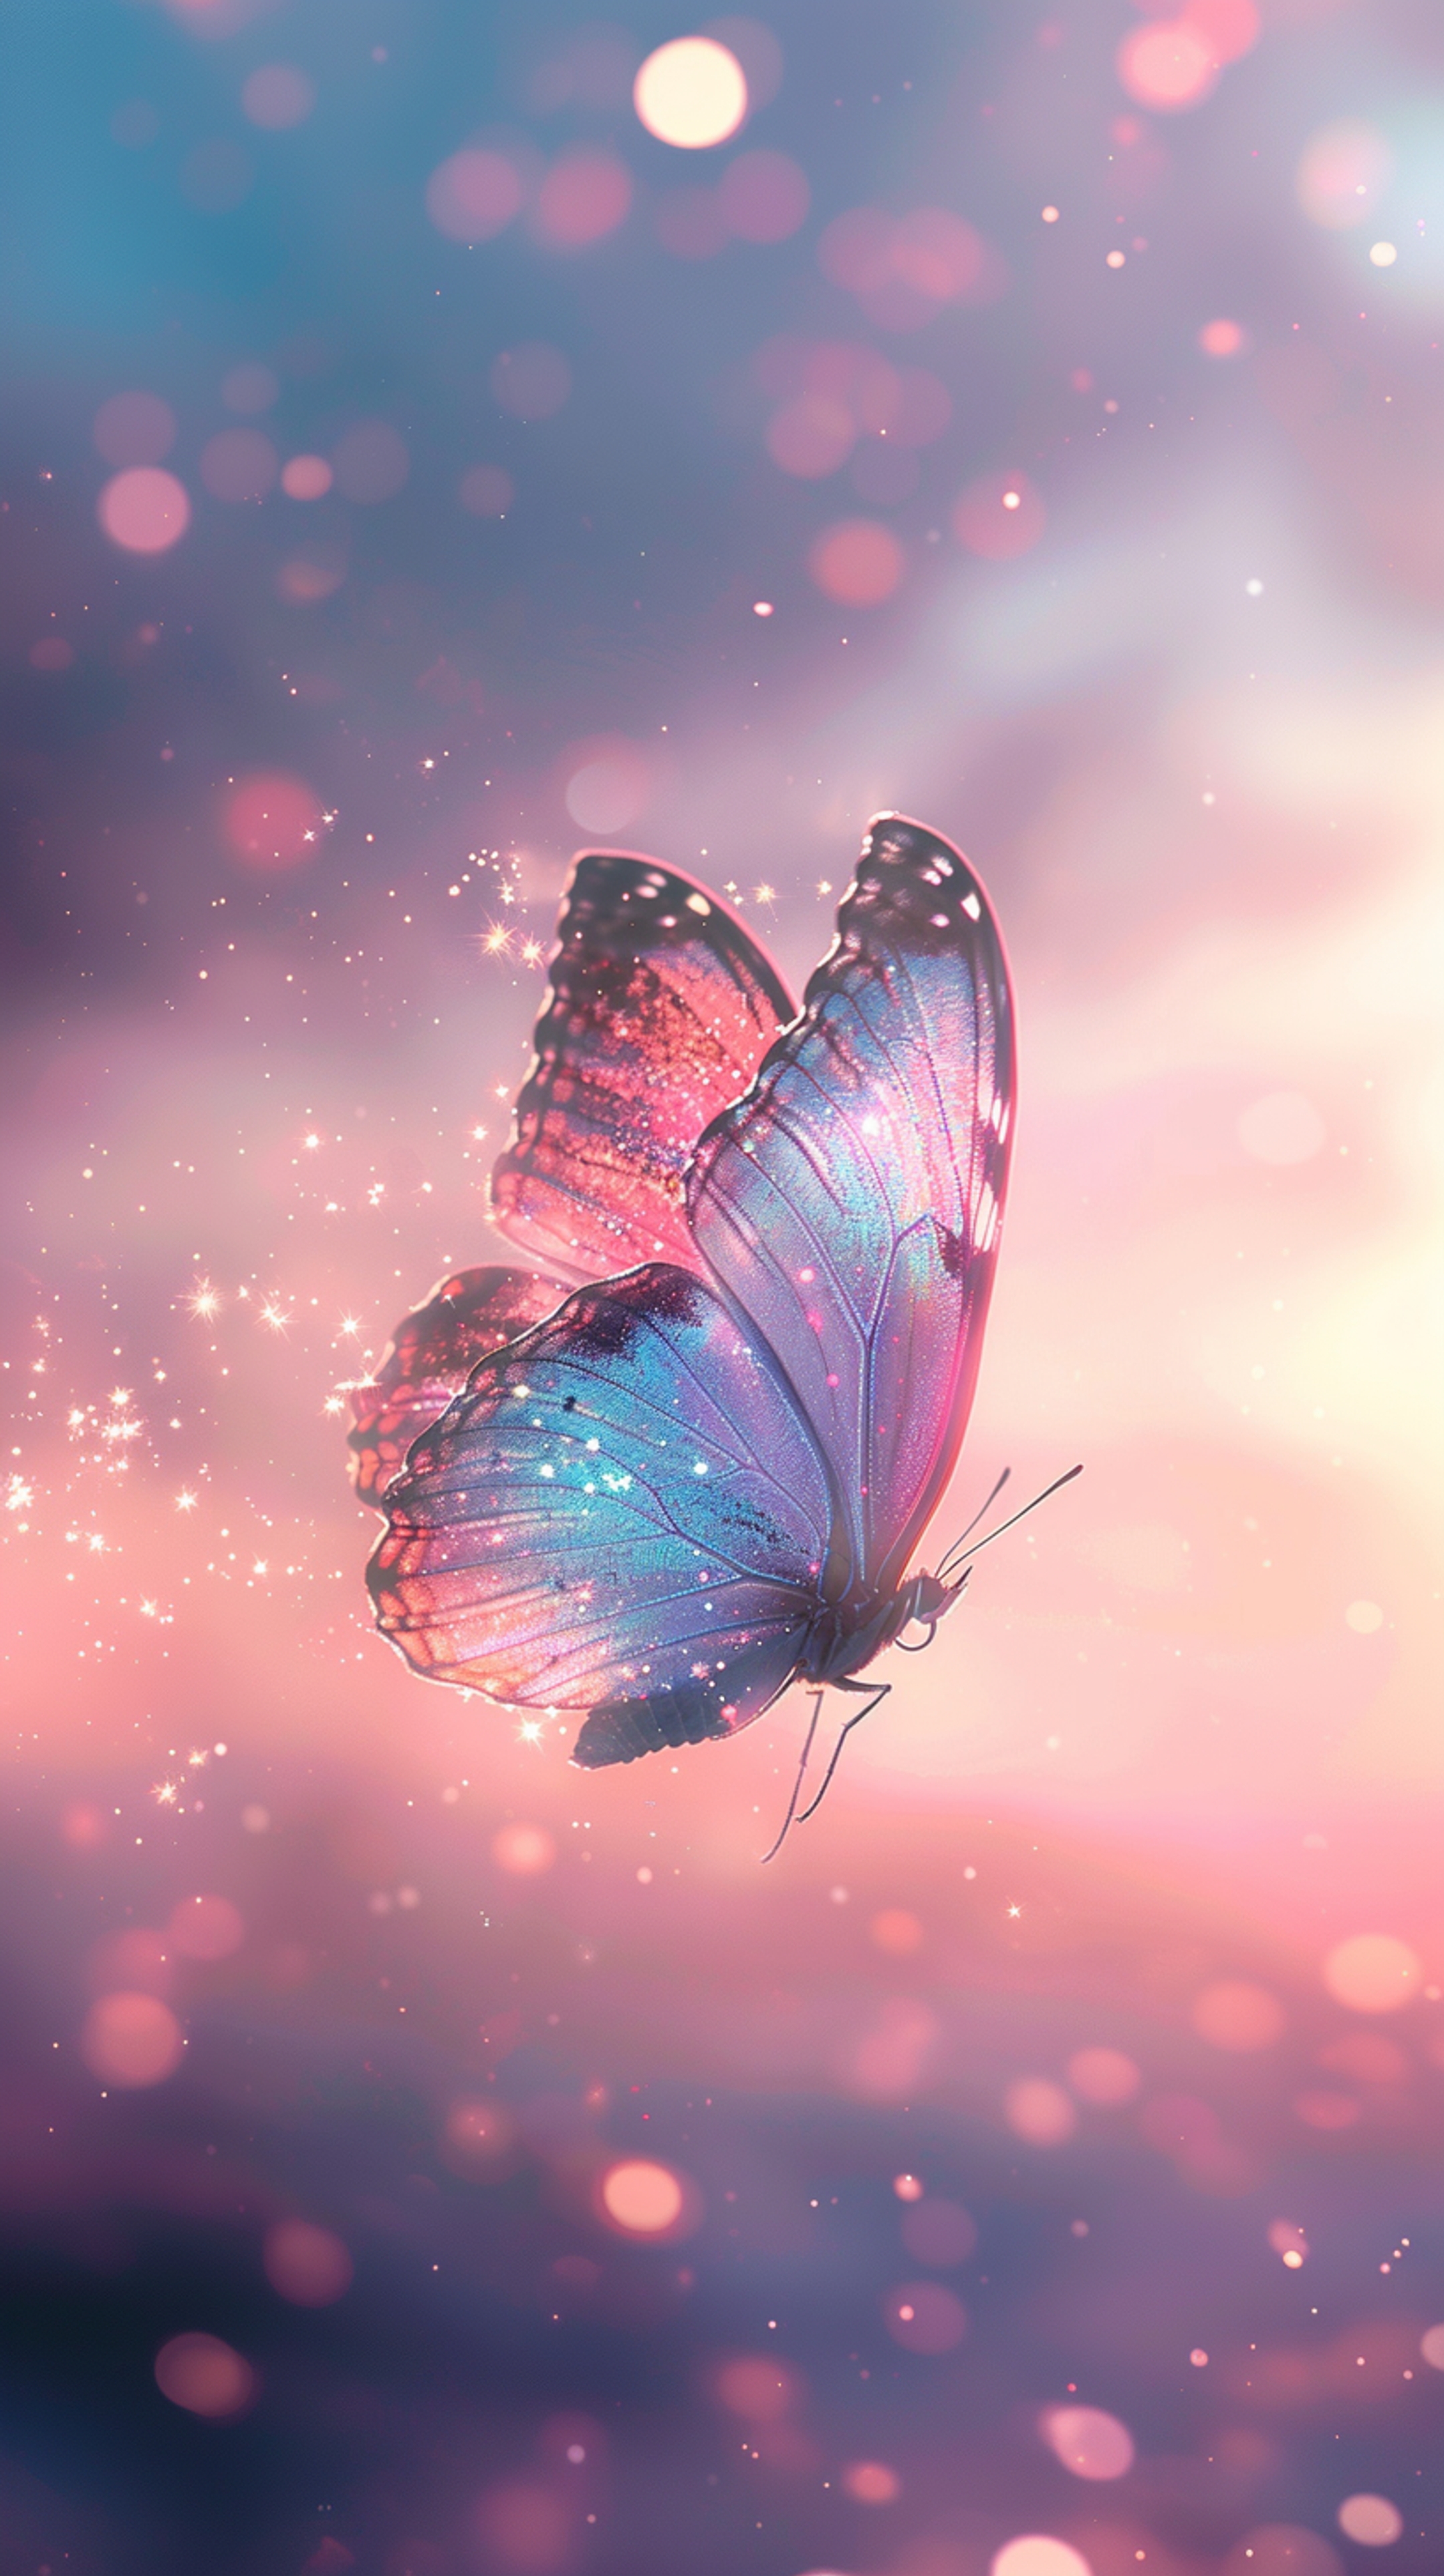 Magical Sparkling Butterfly in Dreamy Pink Sky Tapeta[1278b2409cd84640a5d9]